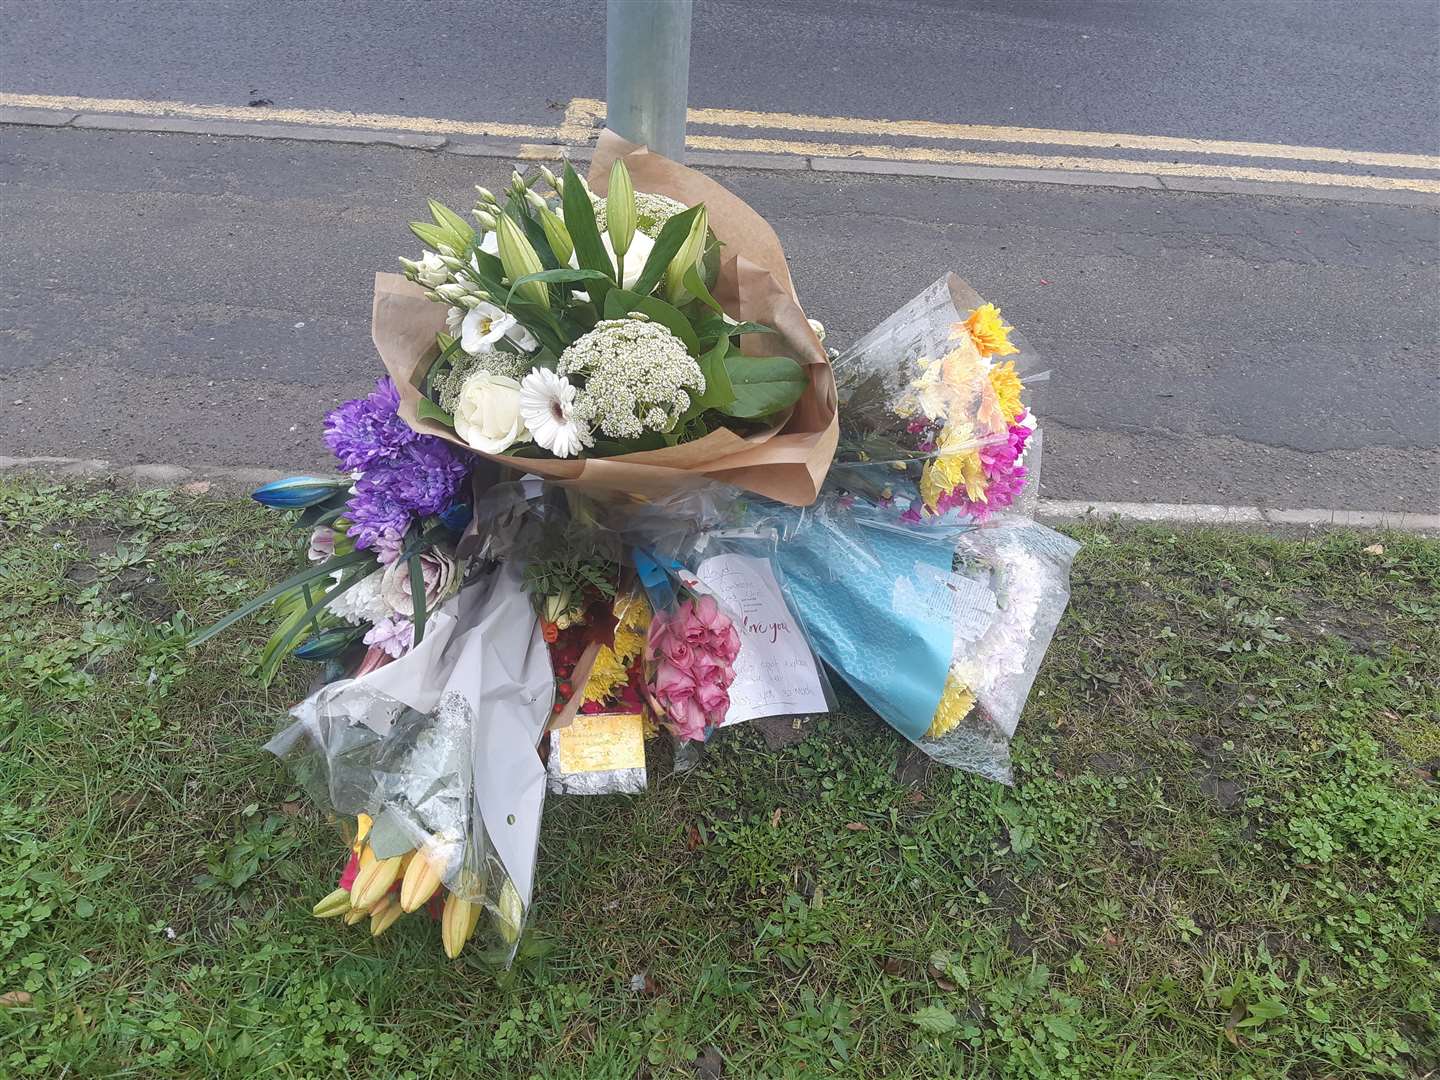 Floral tributes have been arranged near the spot of a fatal collision on Medway City Estate (20908303)